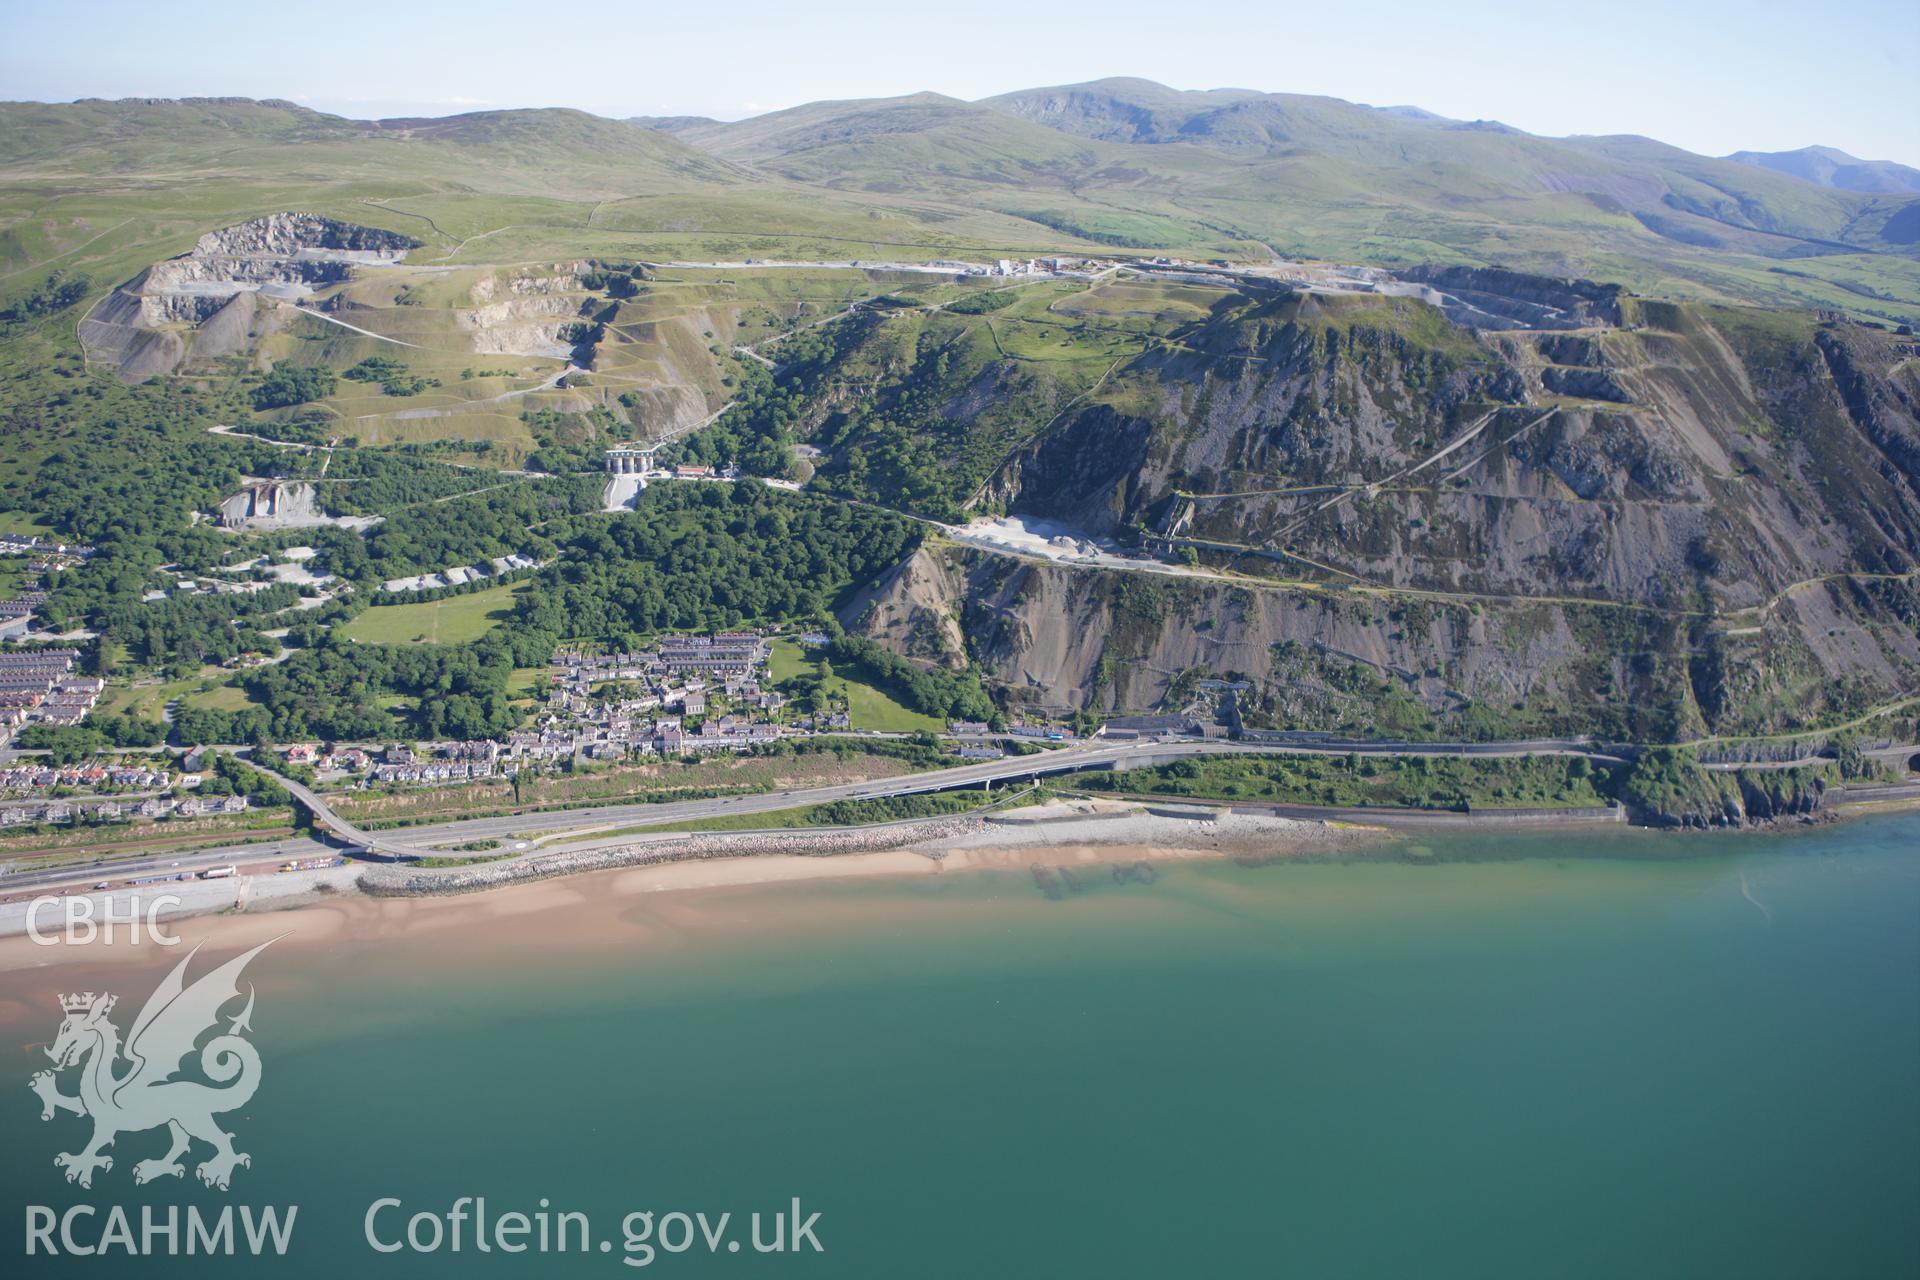 RCAHMW colour oblique photograph of Penmaenmawr Stone Quarry, with Penmaermawr town below. Taken by Toby Driver on 16/06/2010.